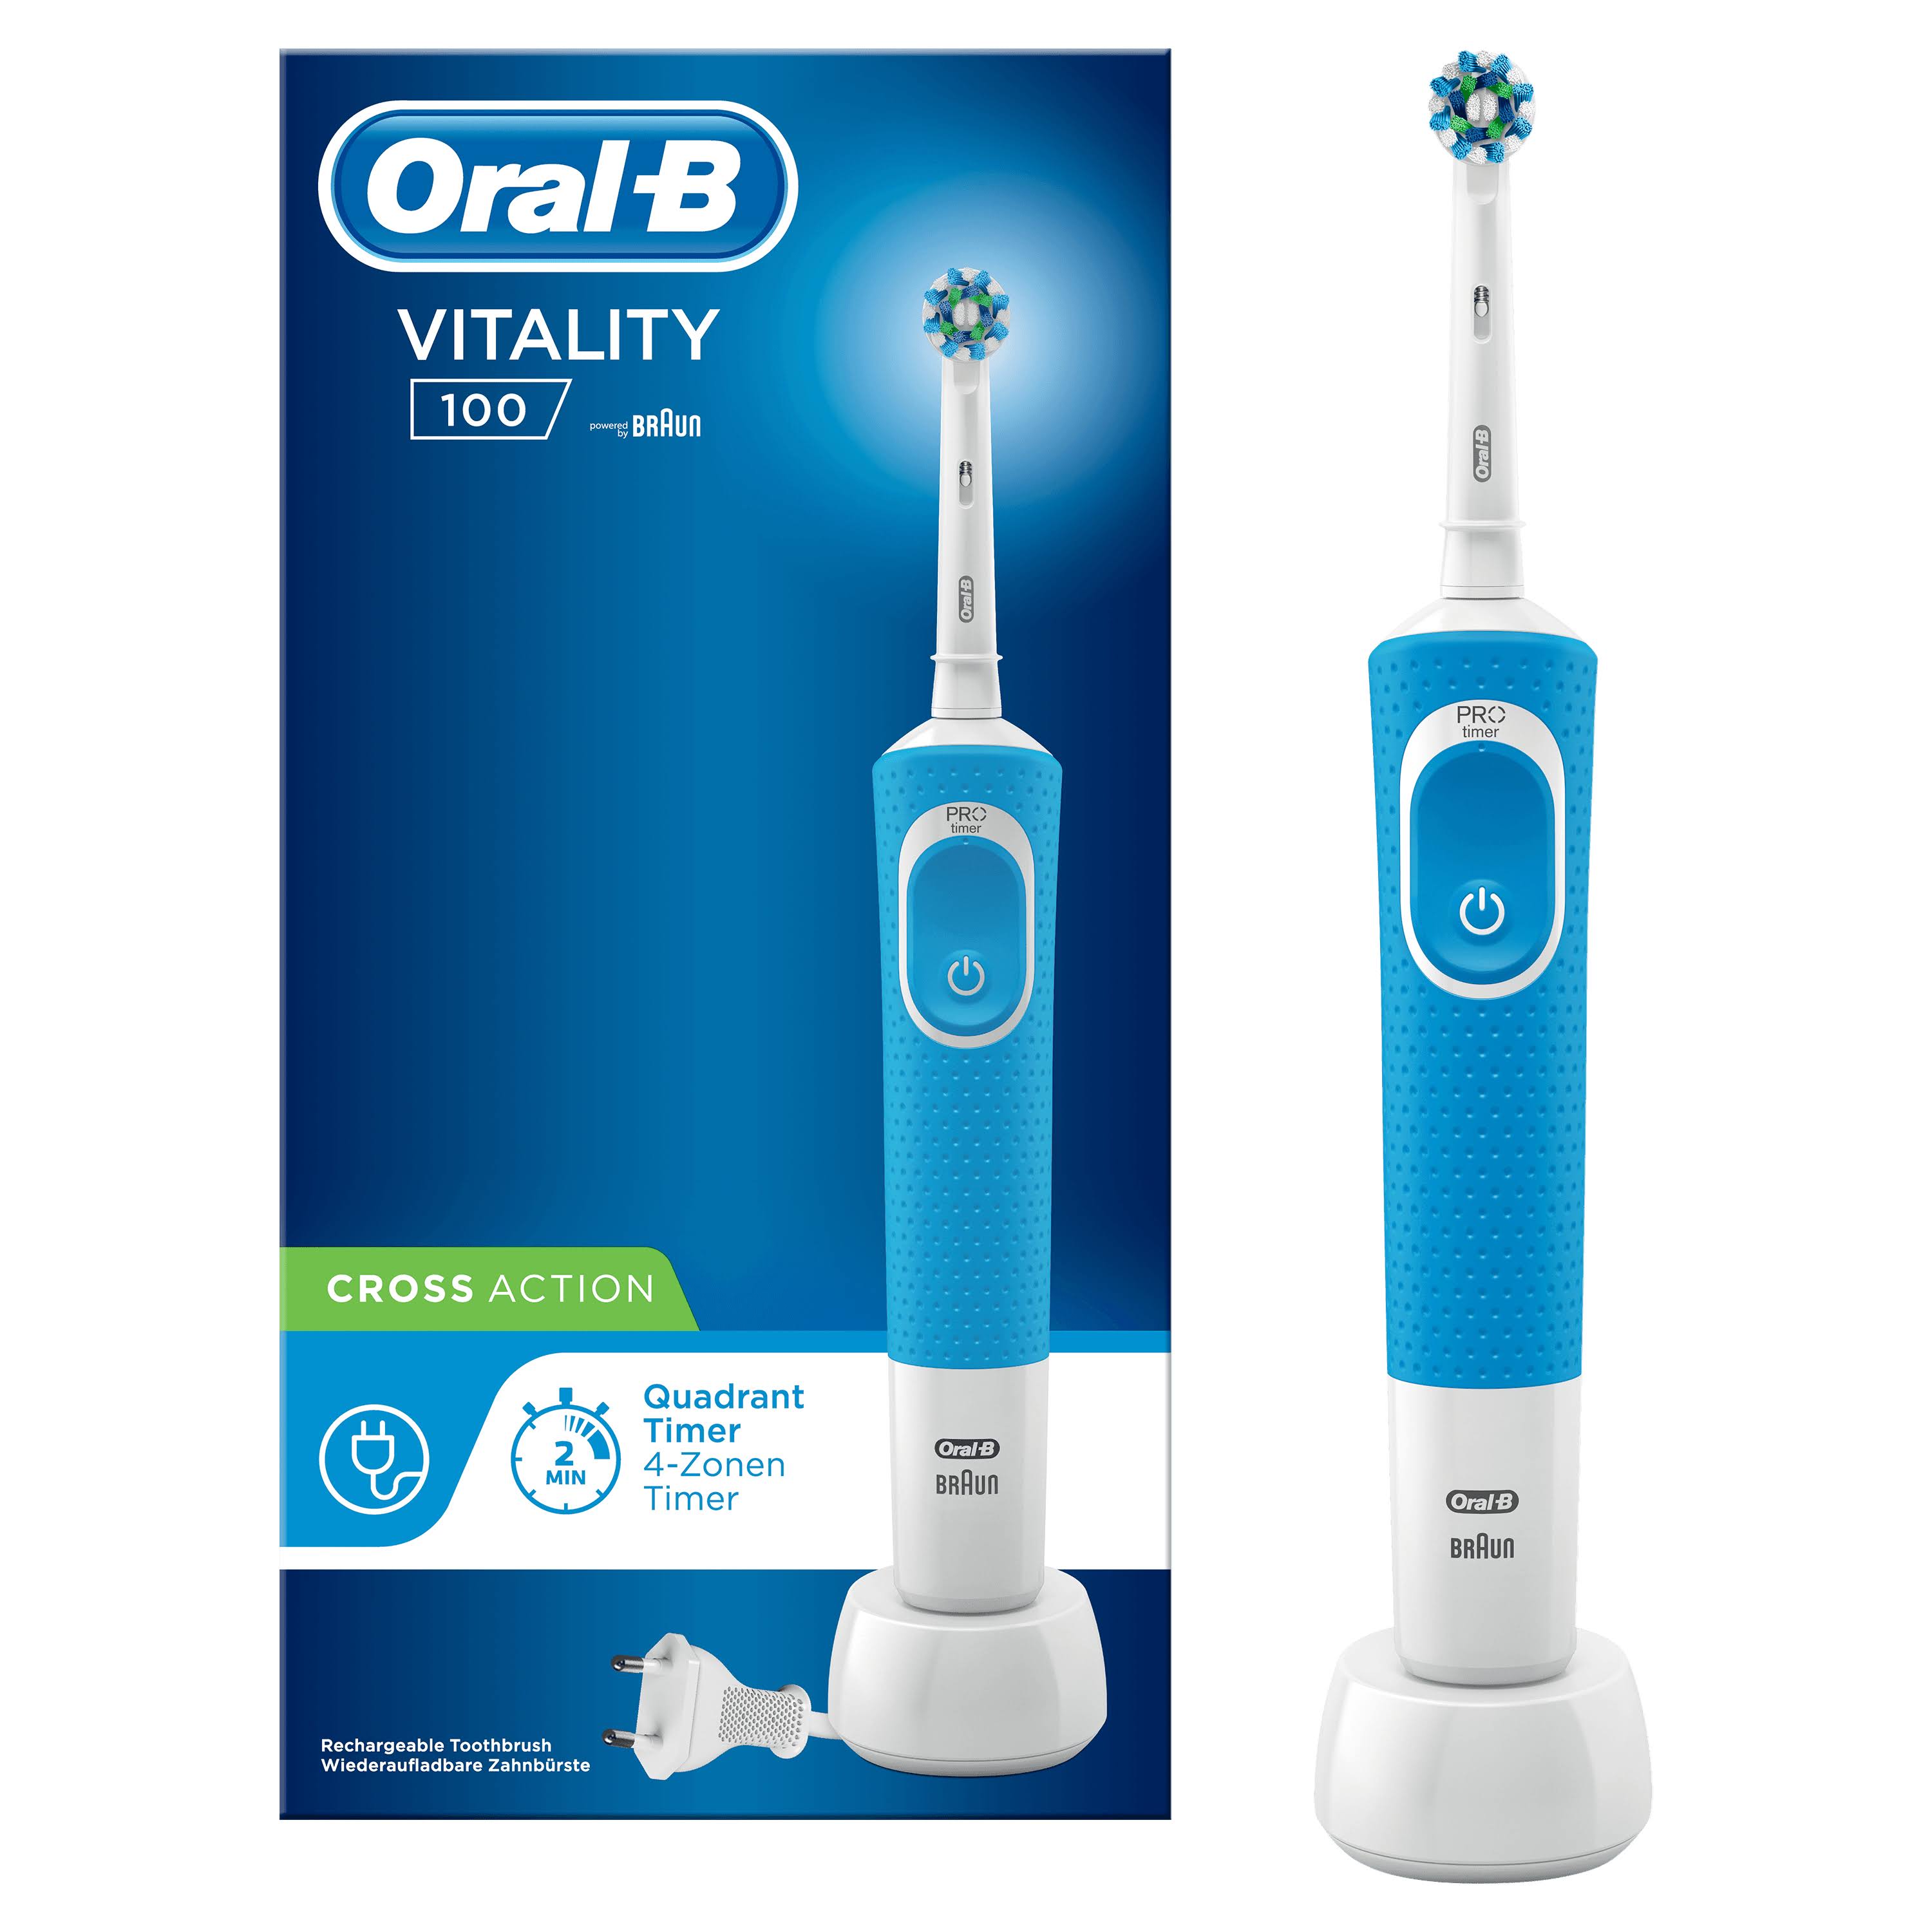 Electric Toothbrush Oral-B Vitality 100 Cross Action - Blue